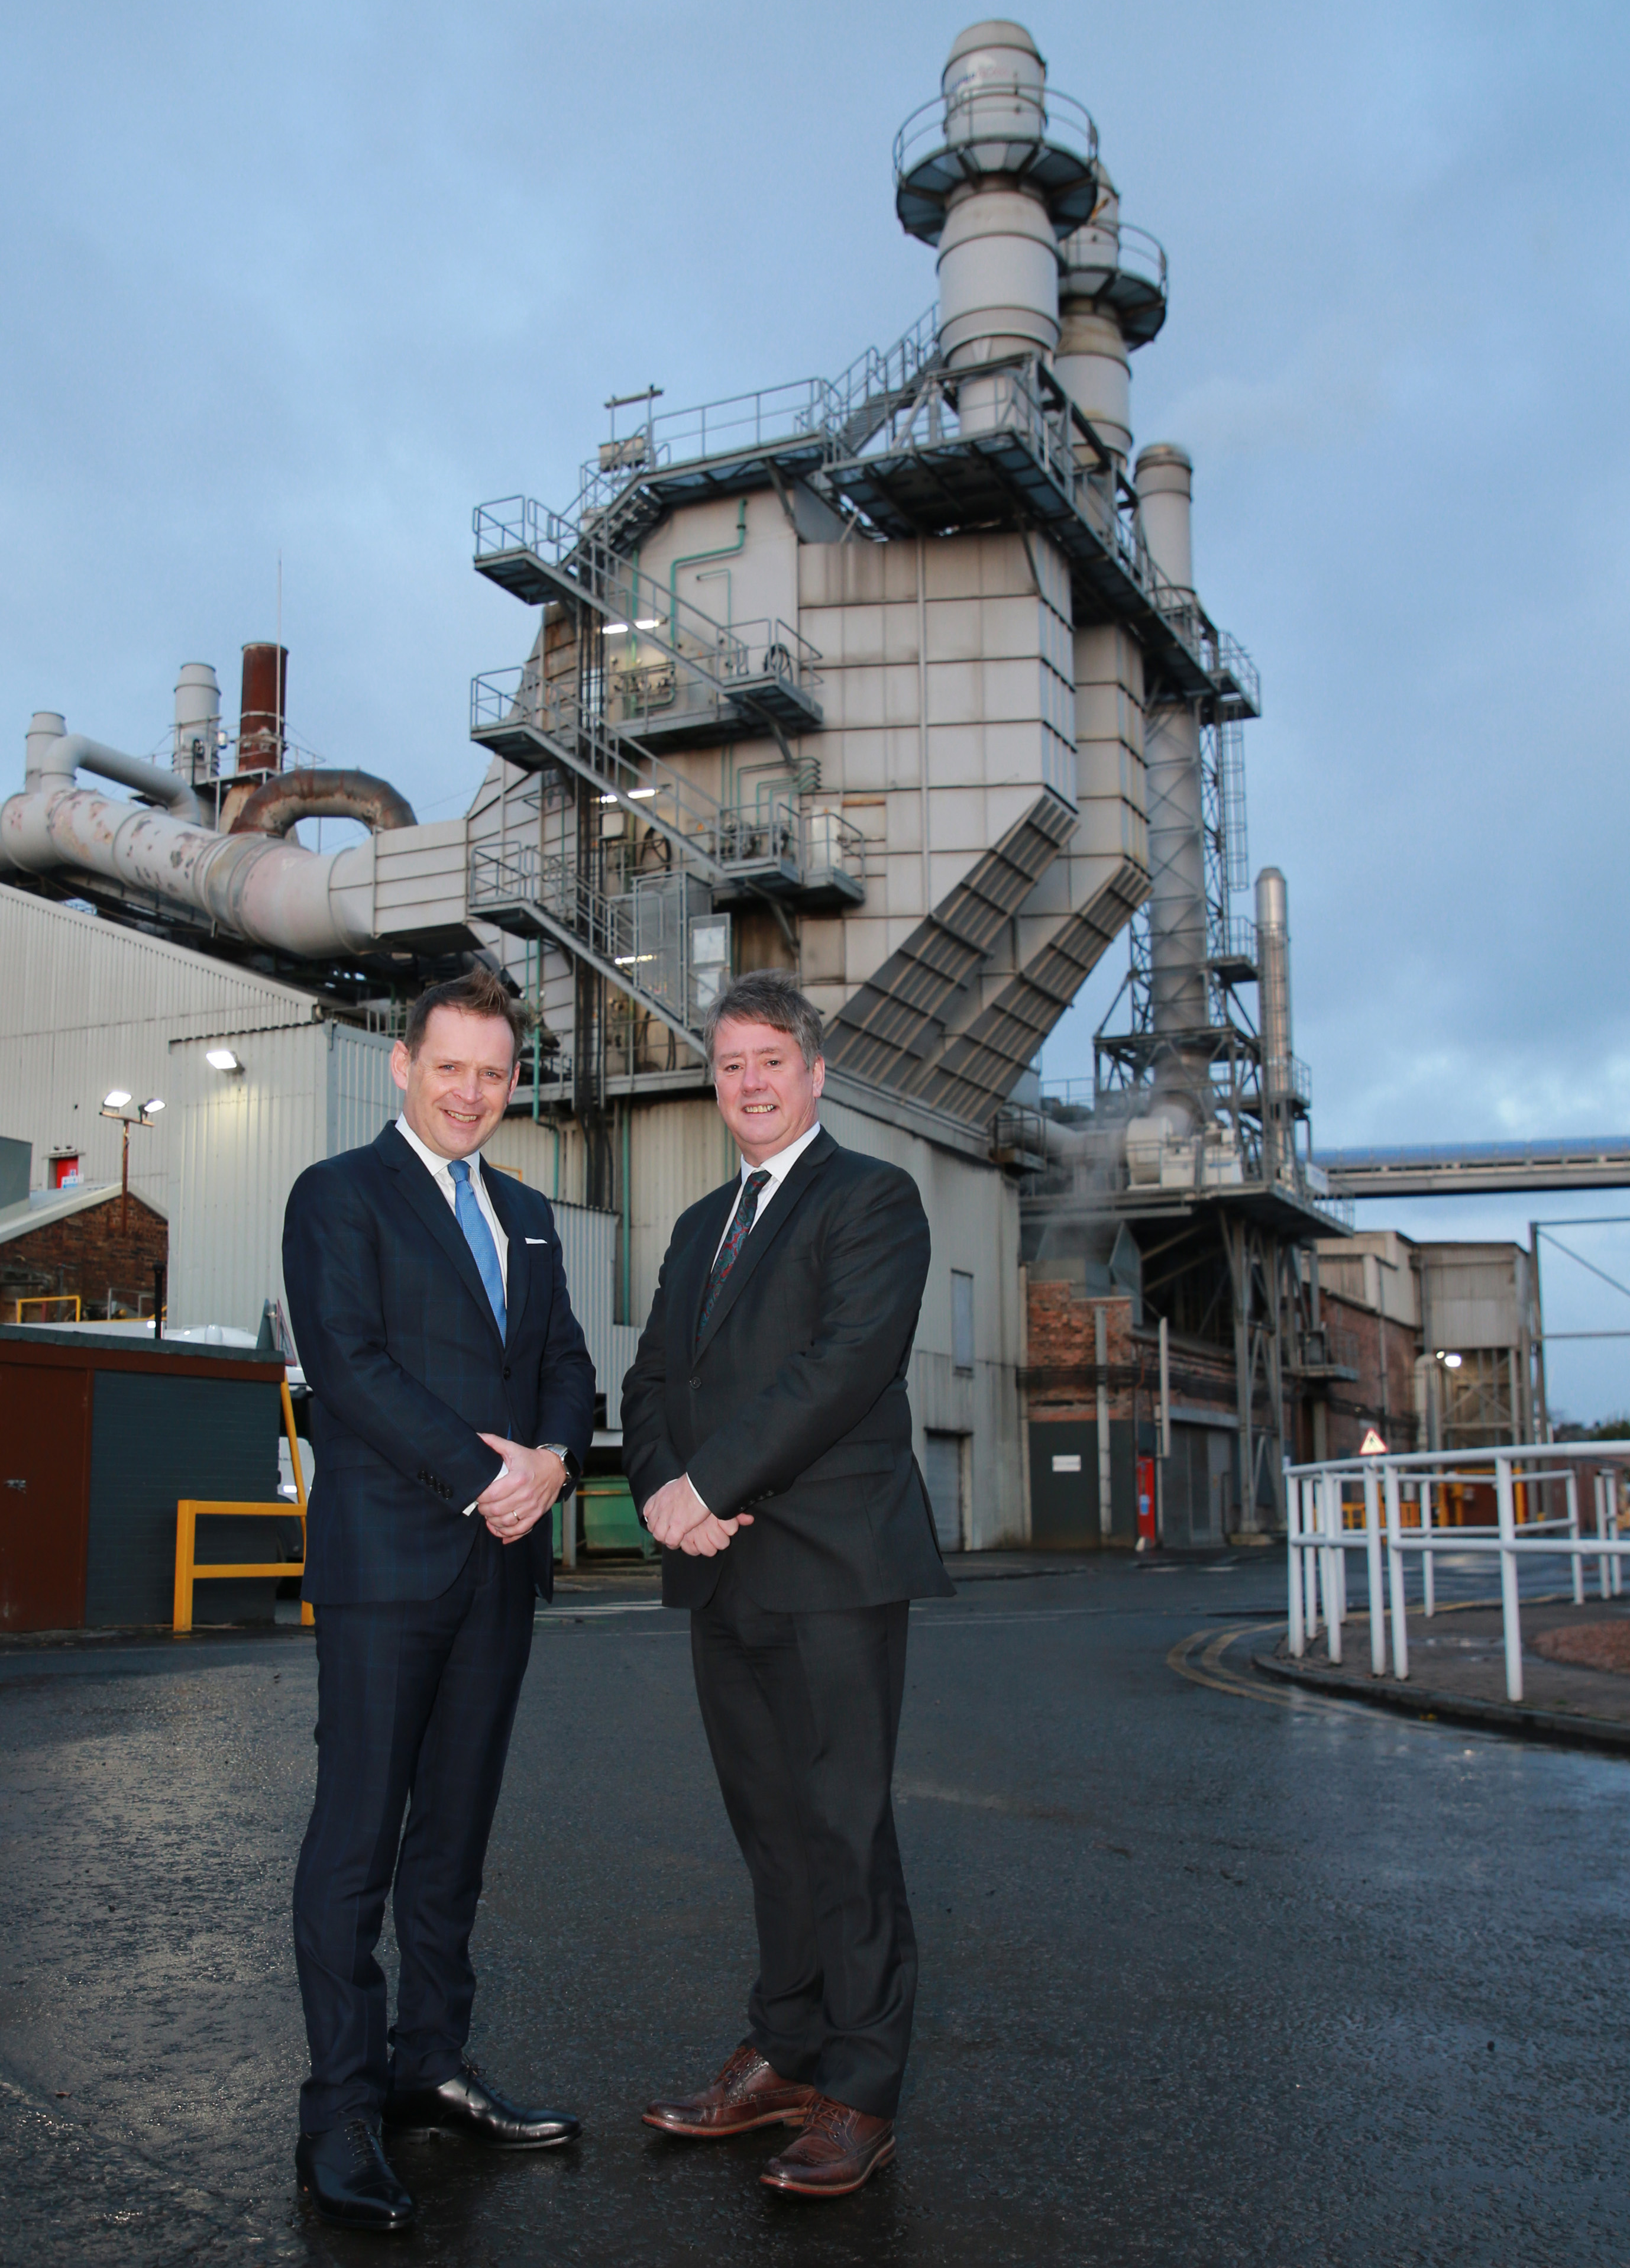 £37m to be invested in Superglass manufacturing facility in Stirling